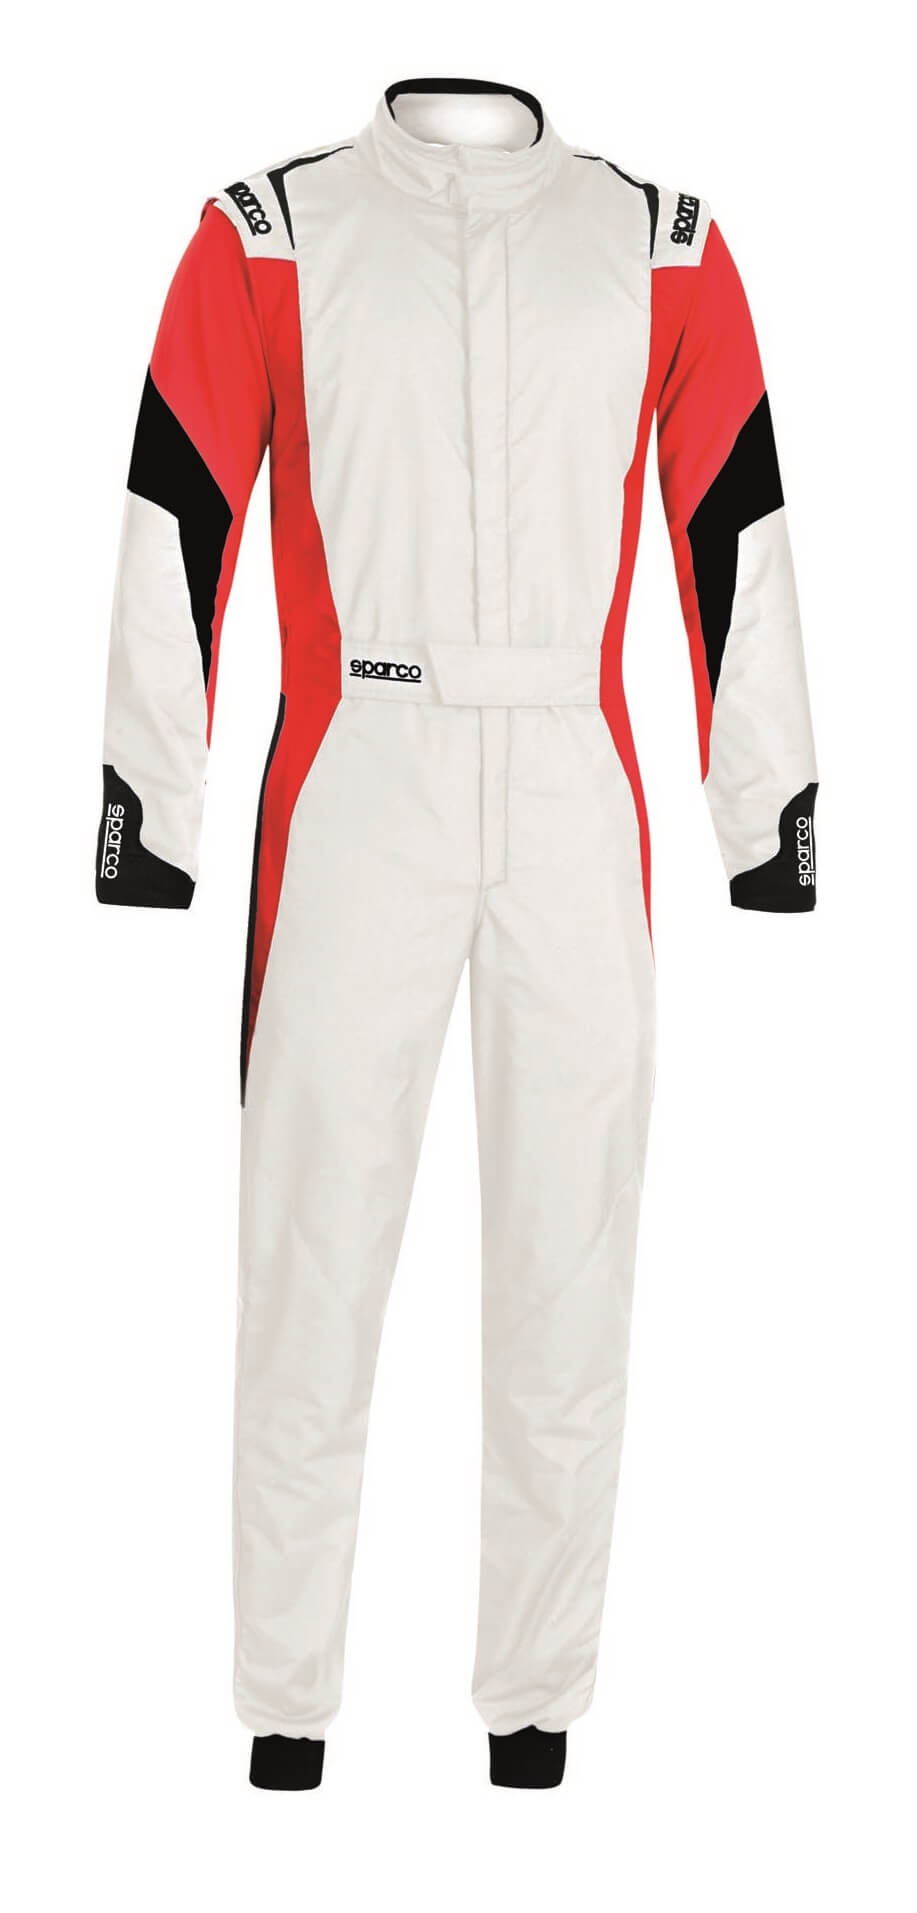 SPARCO 00114452BRNR COMPETITION Racing suit 2022, FIA 8856-2018, white/red, size 52 Photo-0 